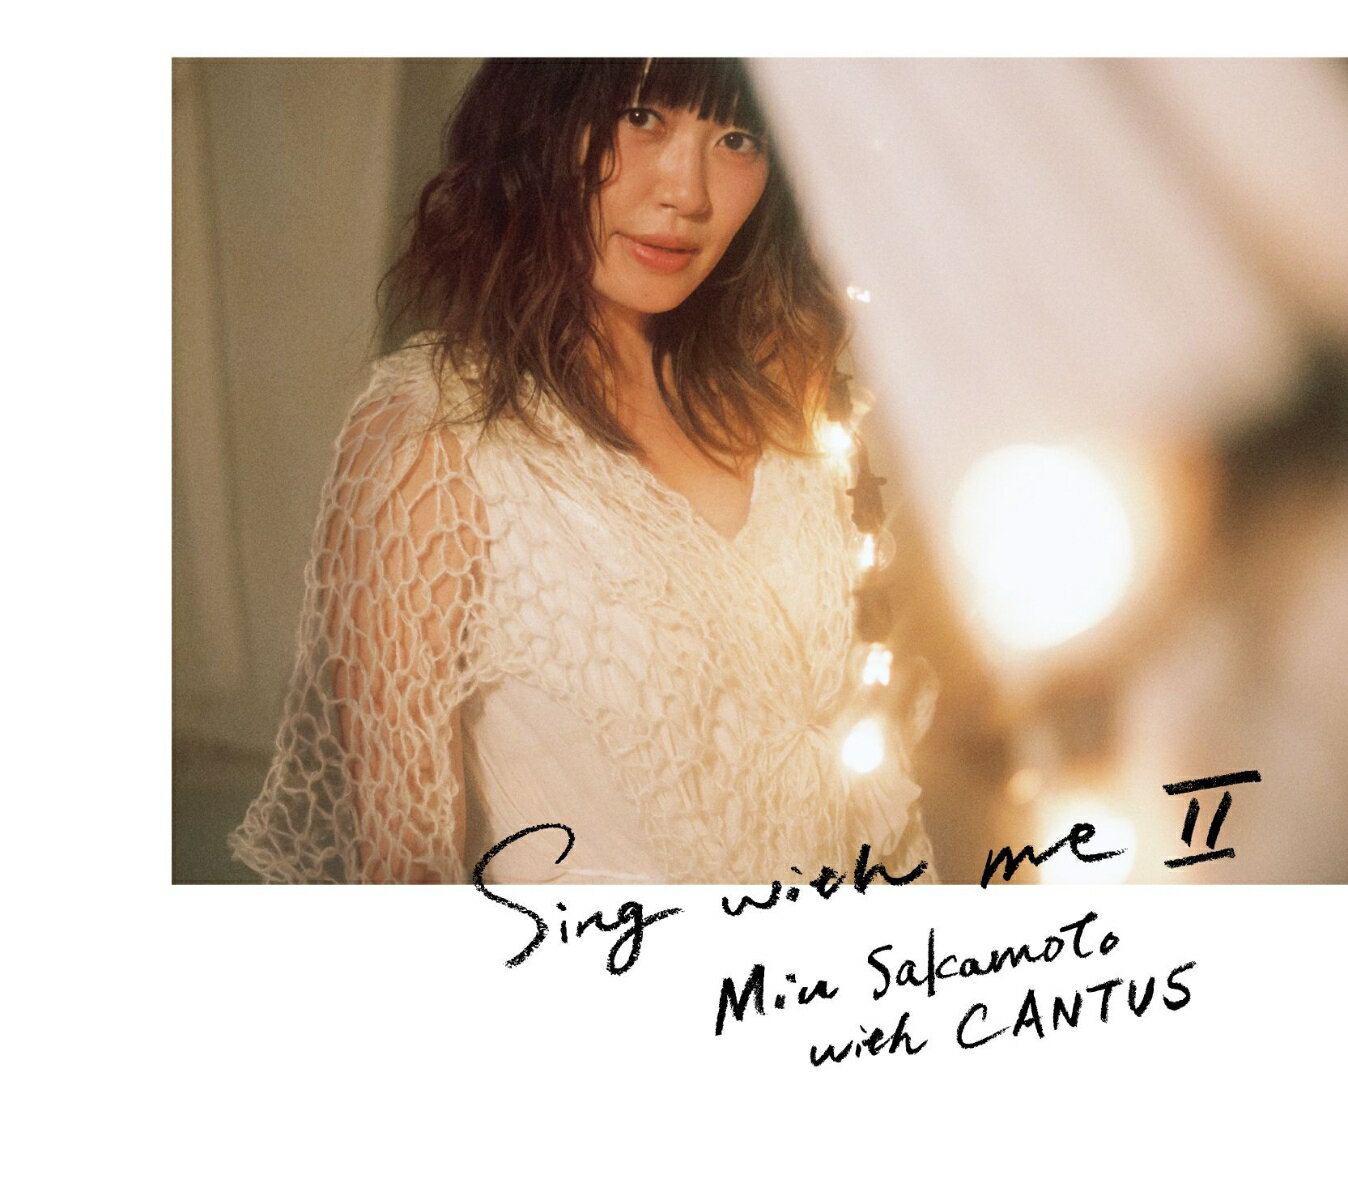 Sing with me 2 [ 坂本美雨 with CANTUS ]